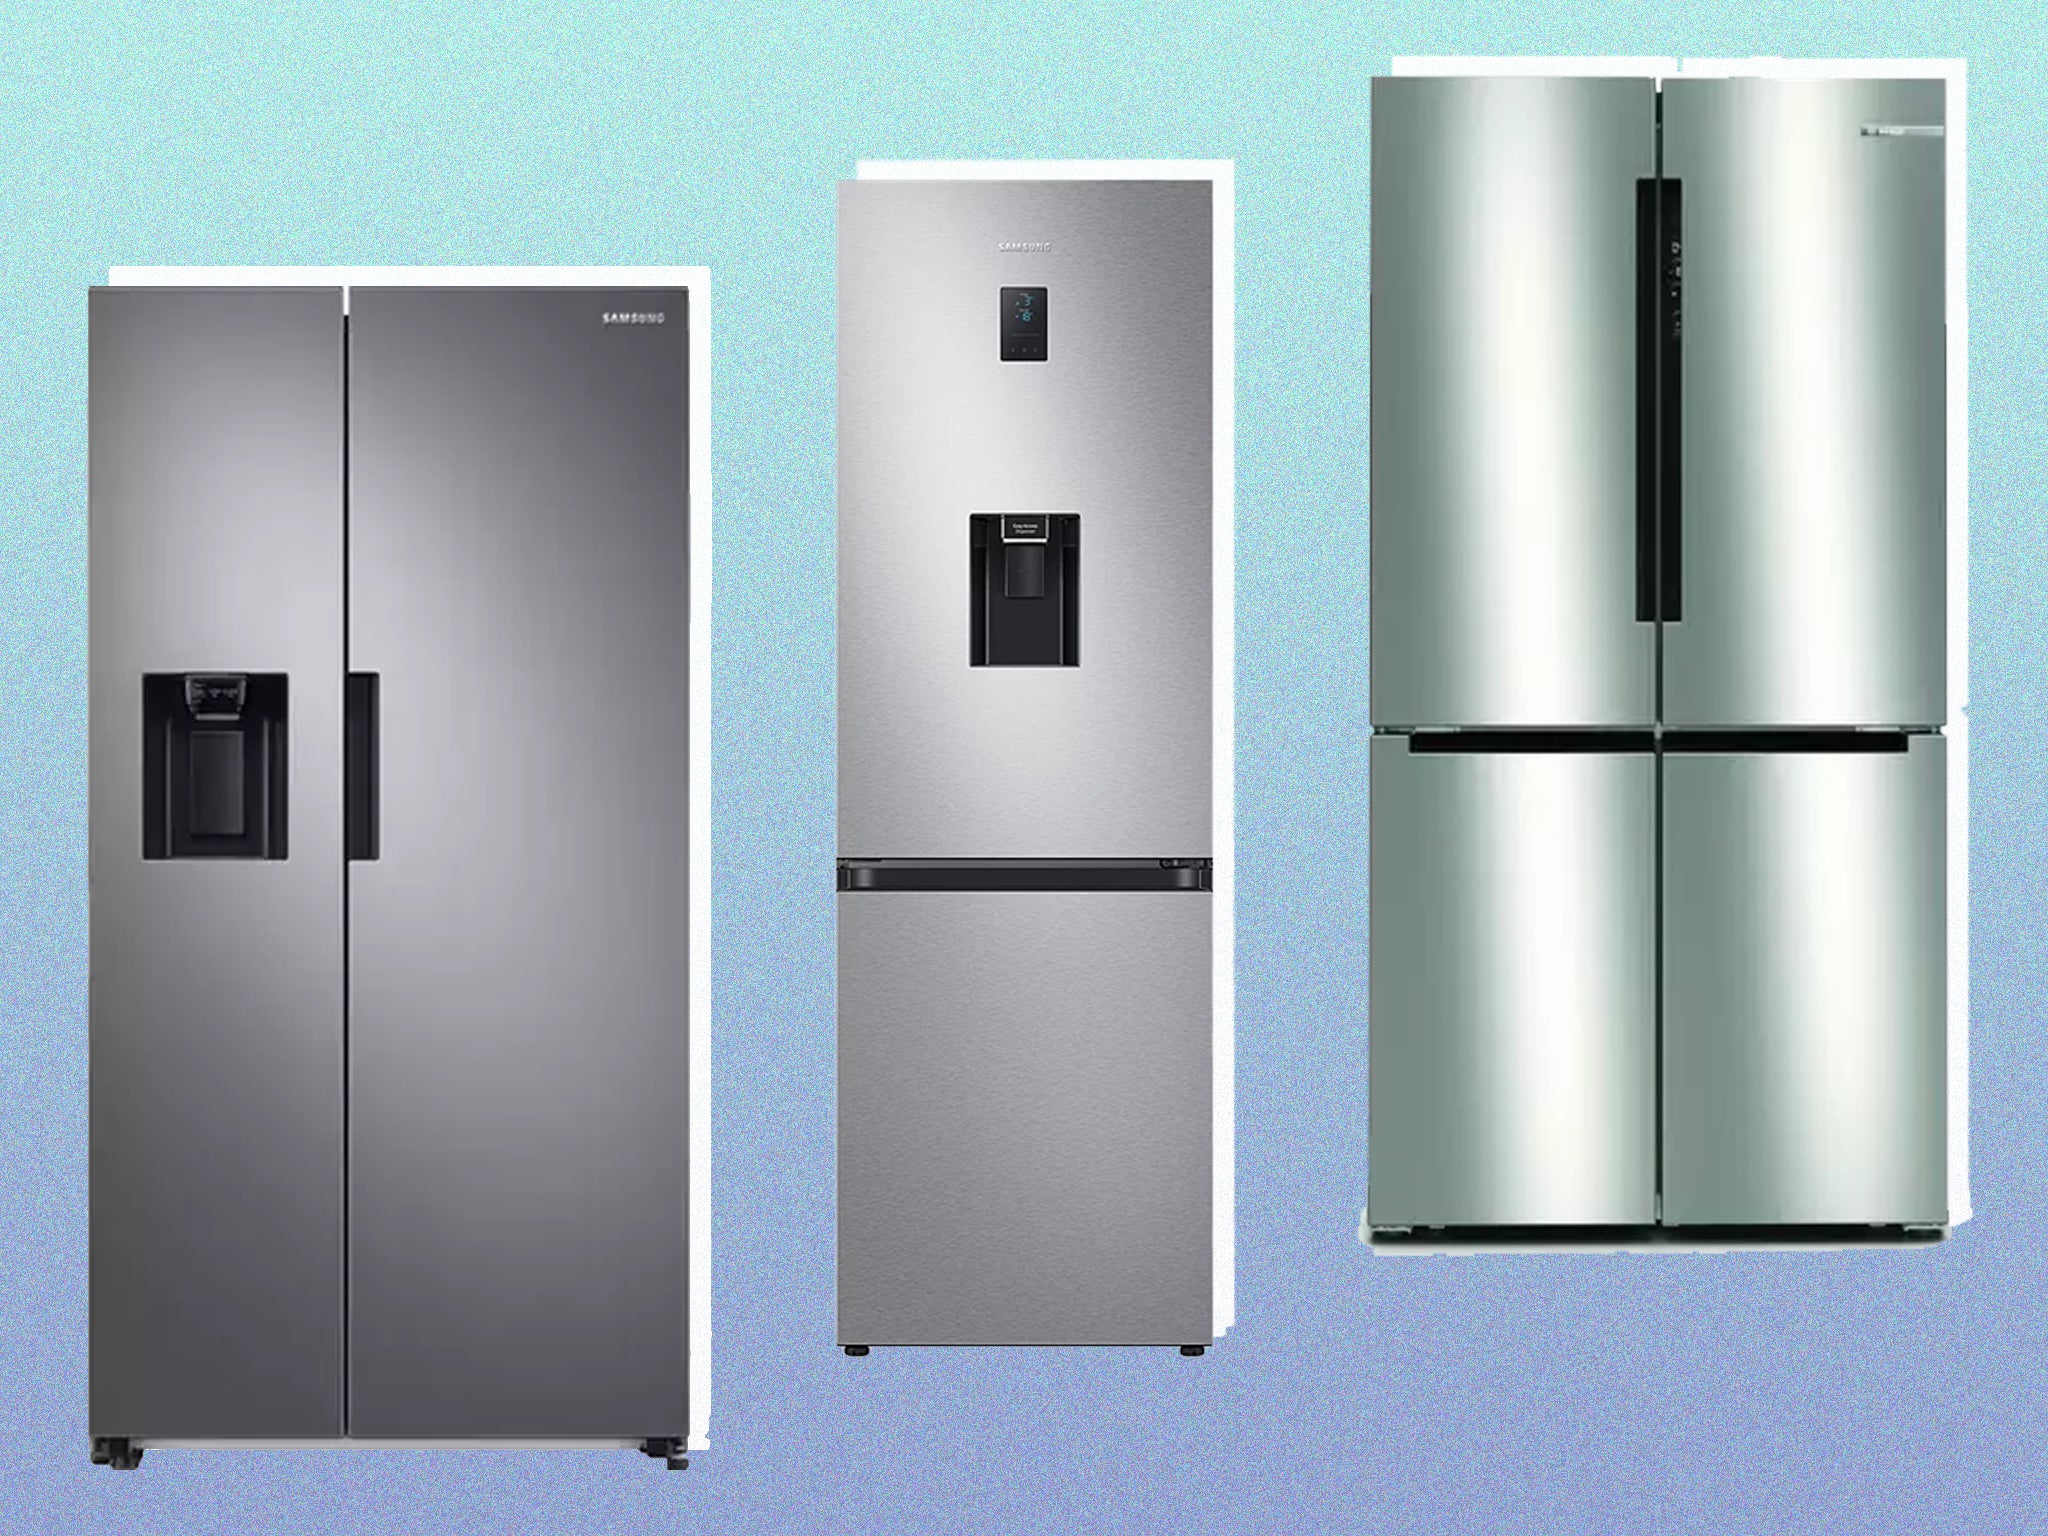 It pays to keep an eye out for offers on large appliances